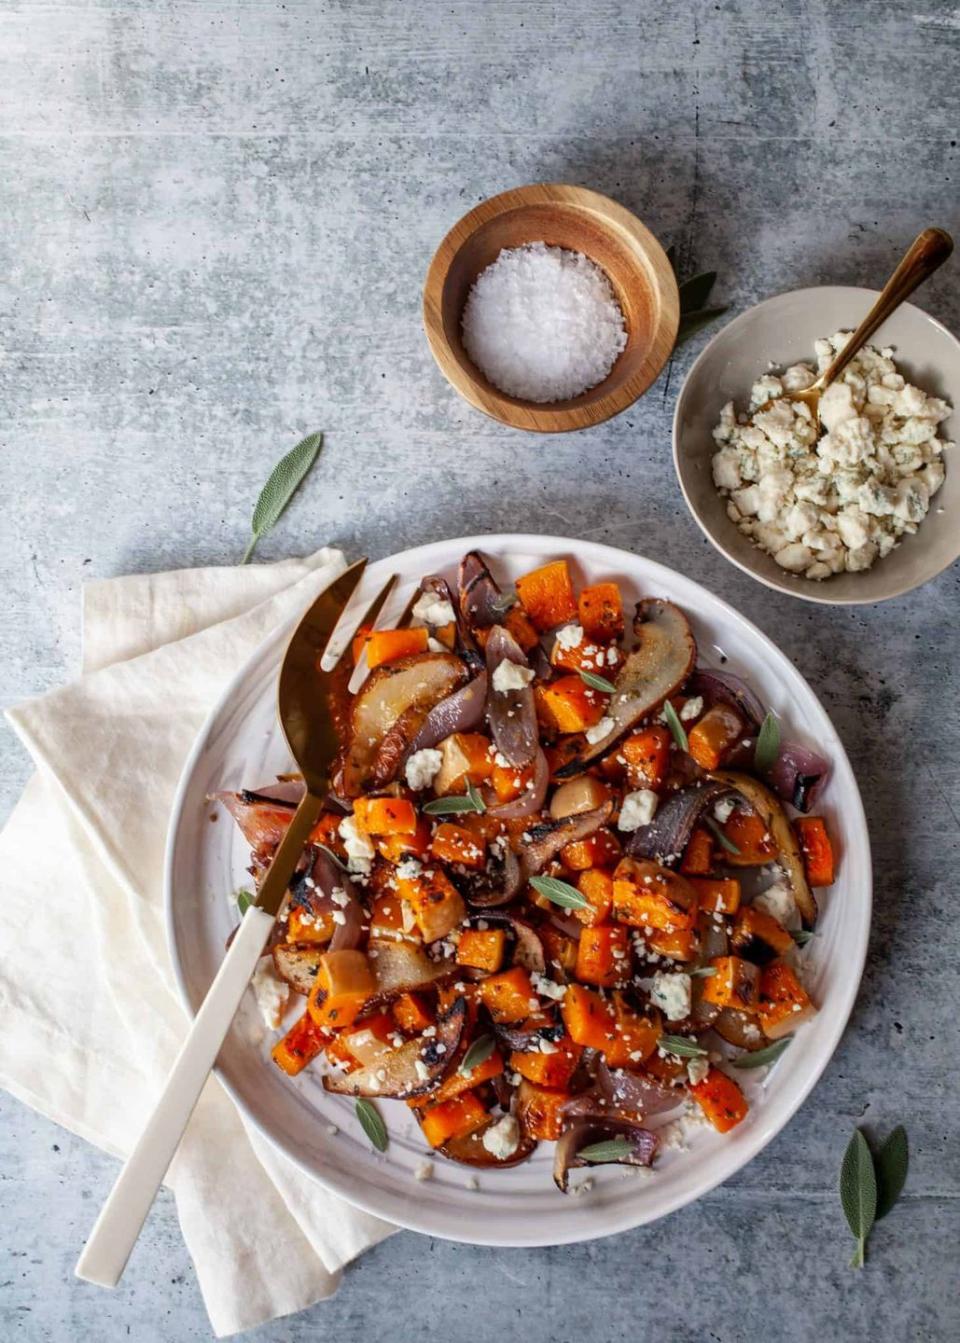 Roasted Butternut Squash, Red Onions, and Pears